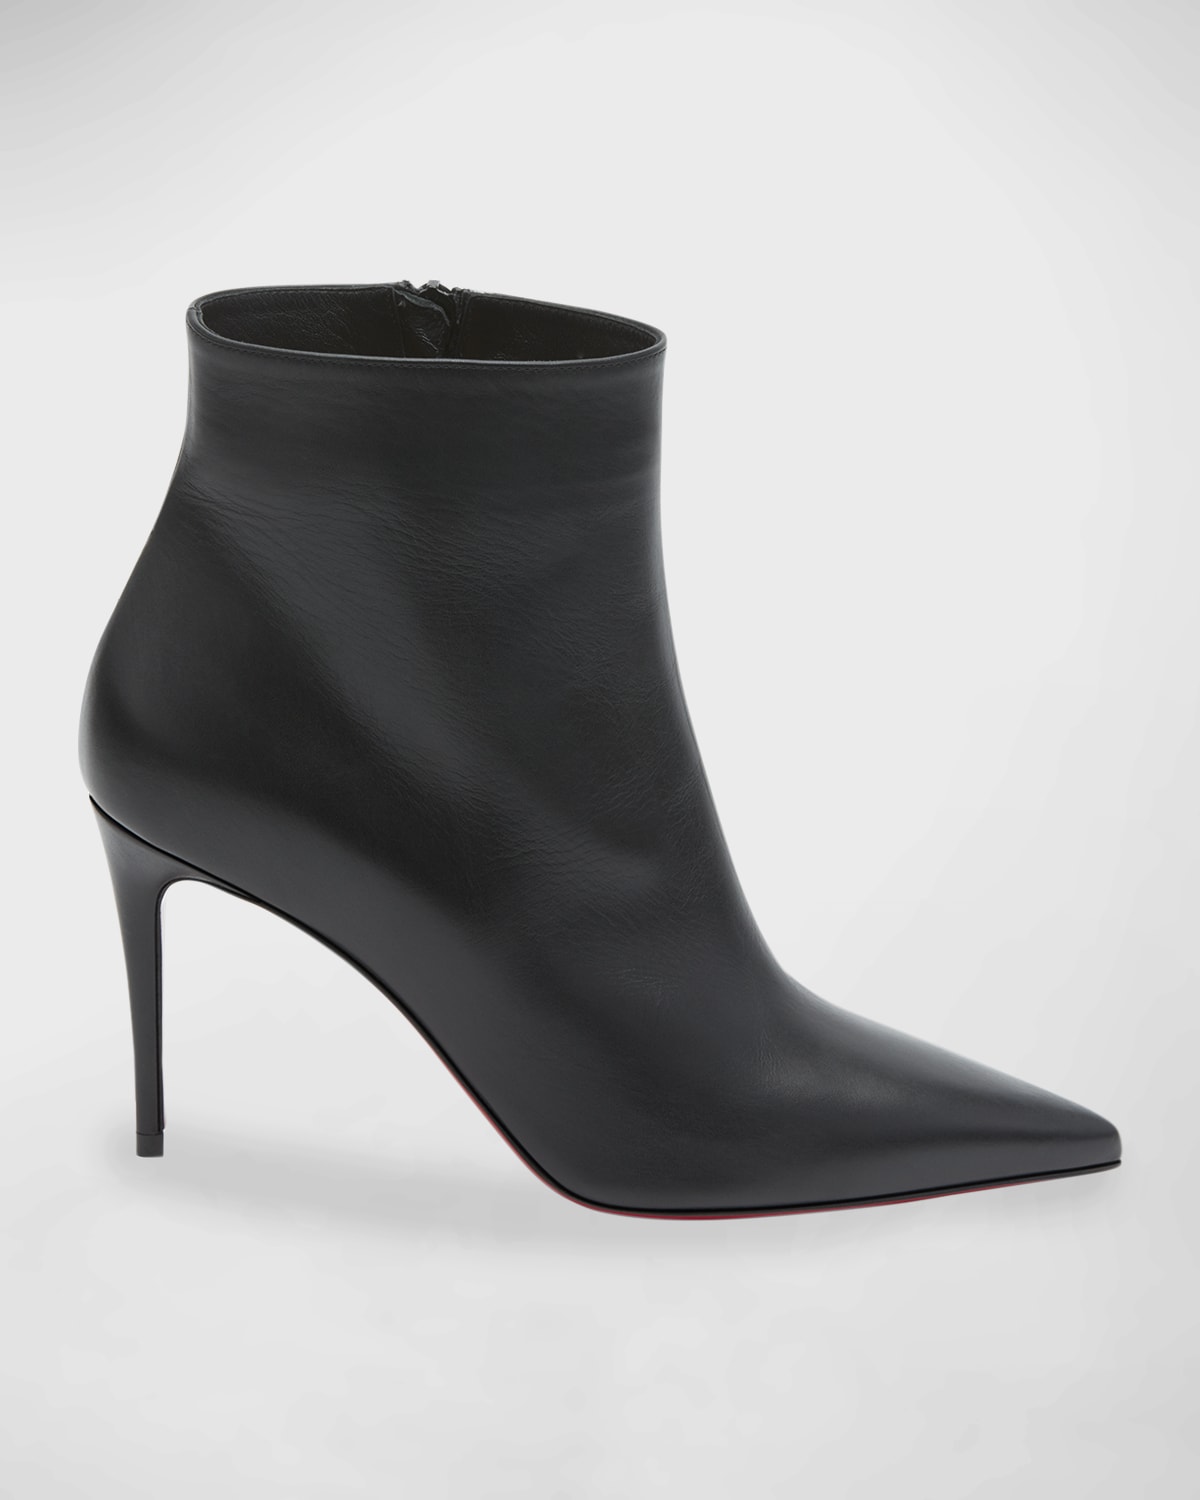 So Kate Leather Red Sole Booties